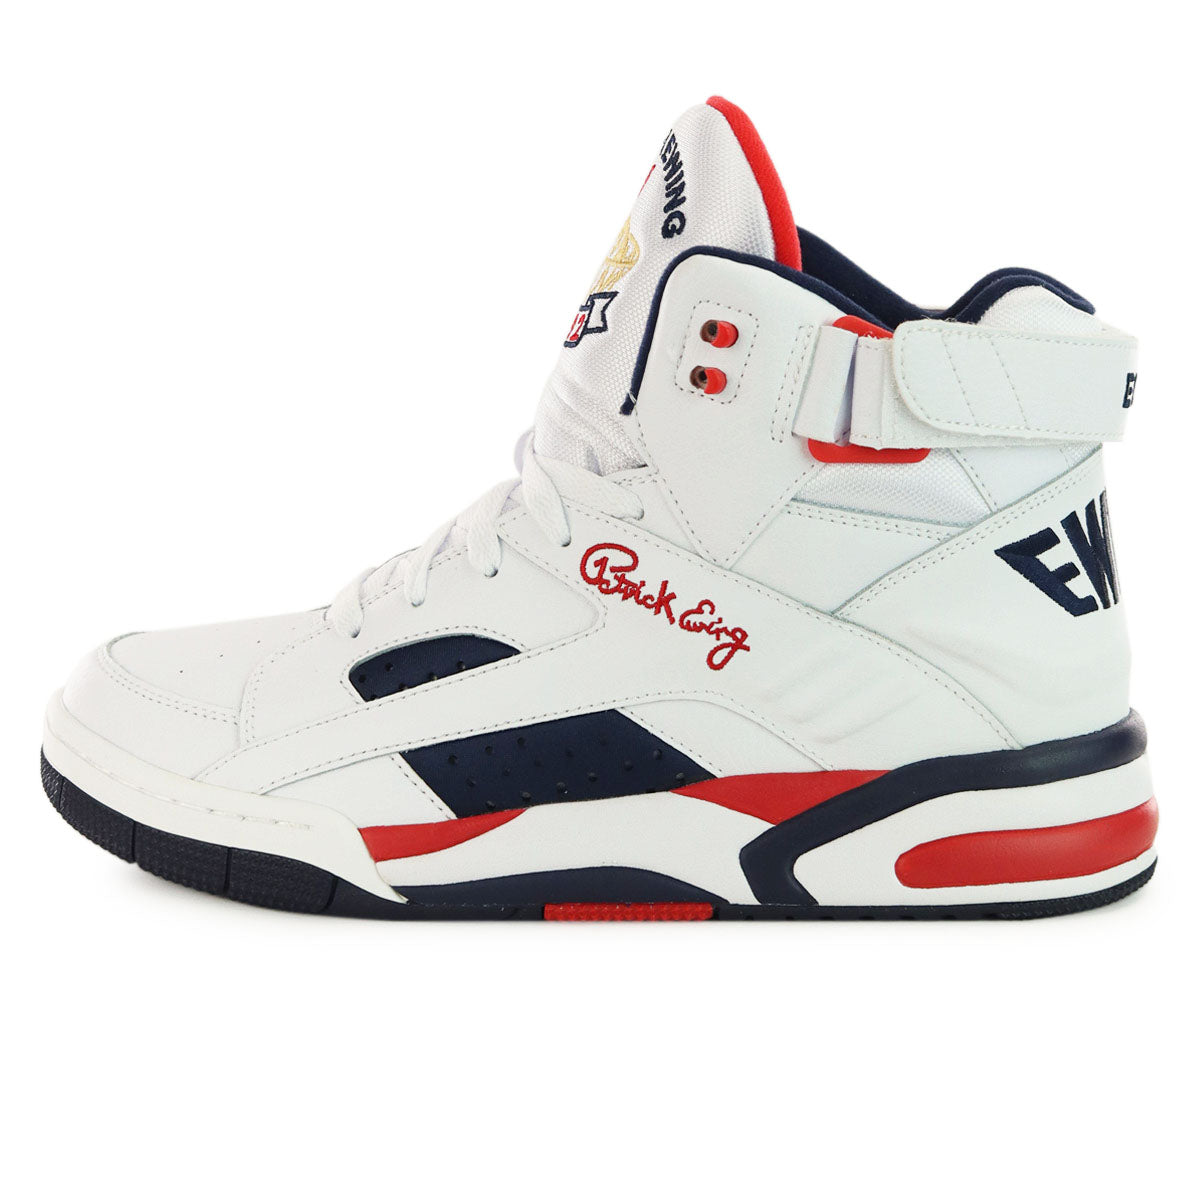 Patrick Ewing Eclipse Olympic Games Edition 1EW90152-125-